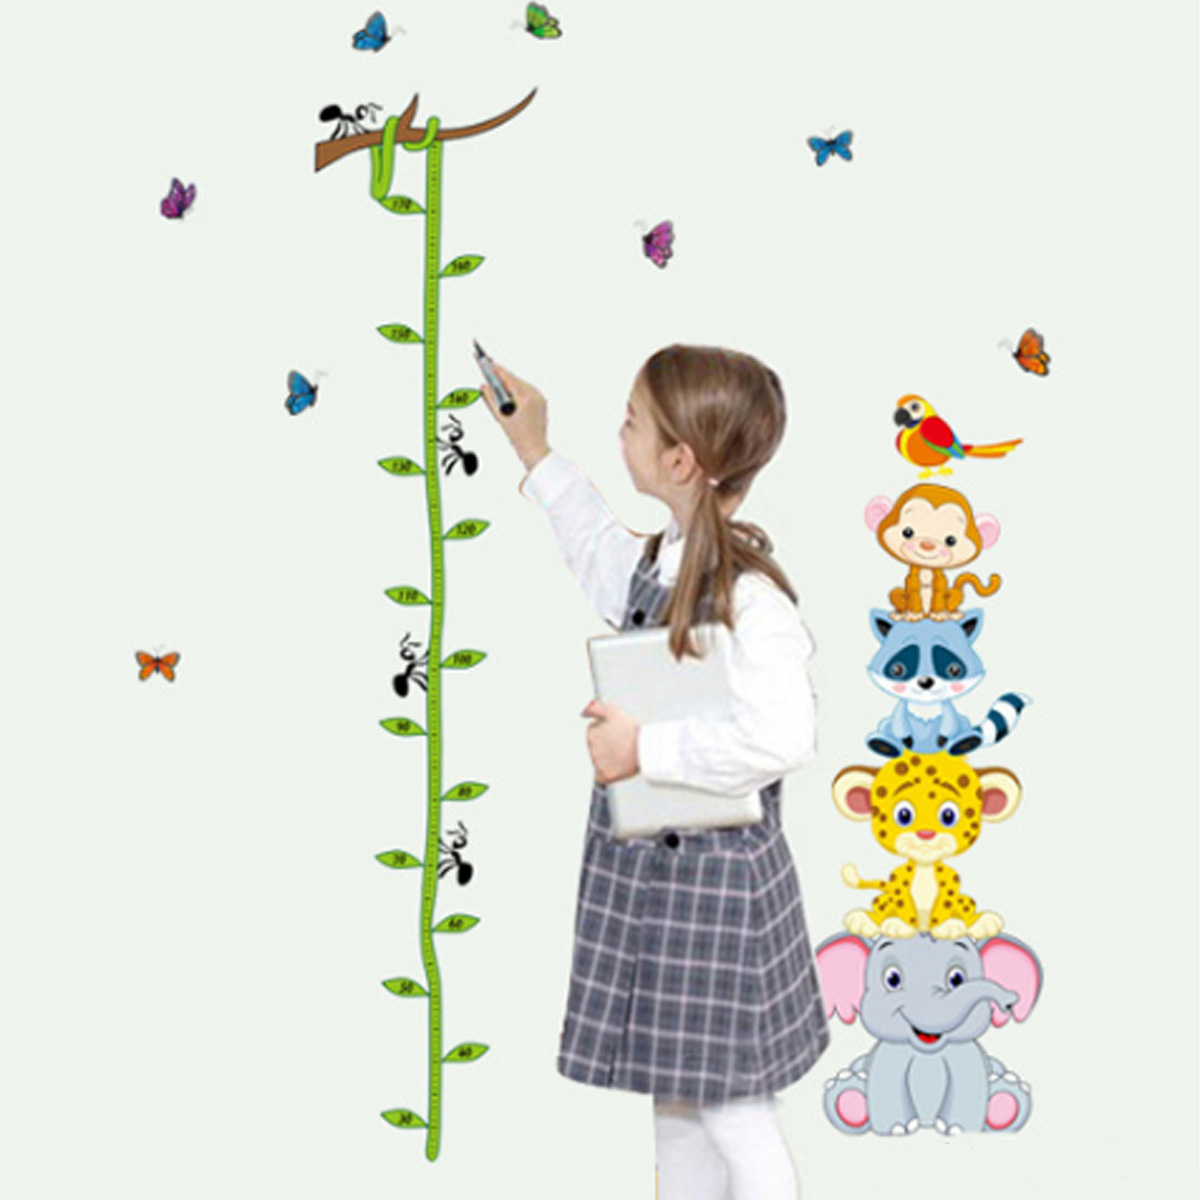 Animals-Height-Chart-Non-toxic-Removable-Wall-Stickers-Kids-Nursery-Elephant-Leopard-Sticker-Decor-1567408-4